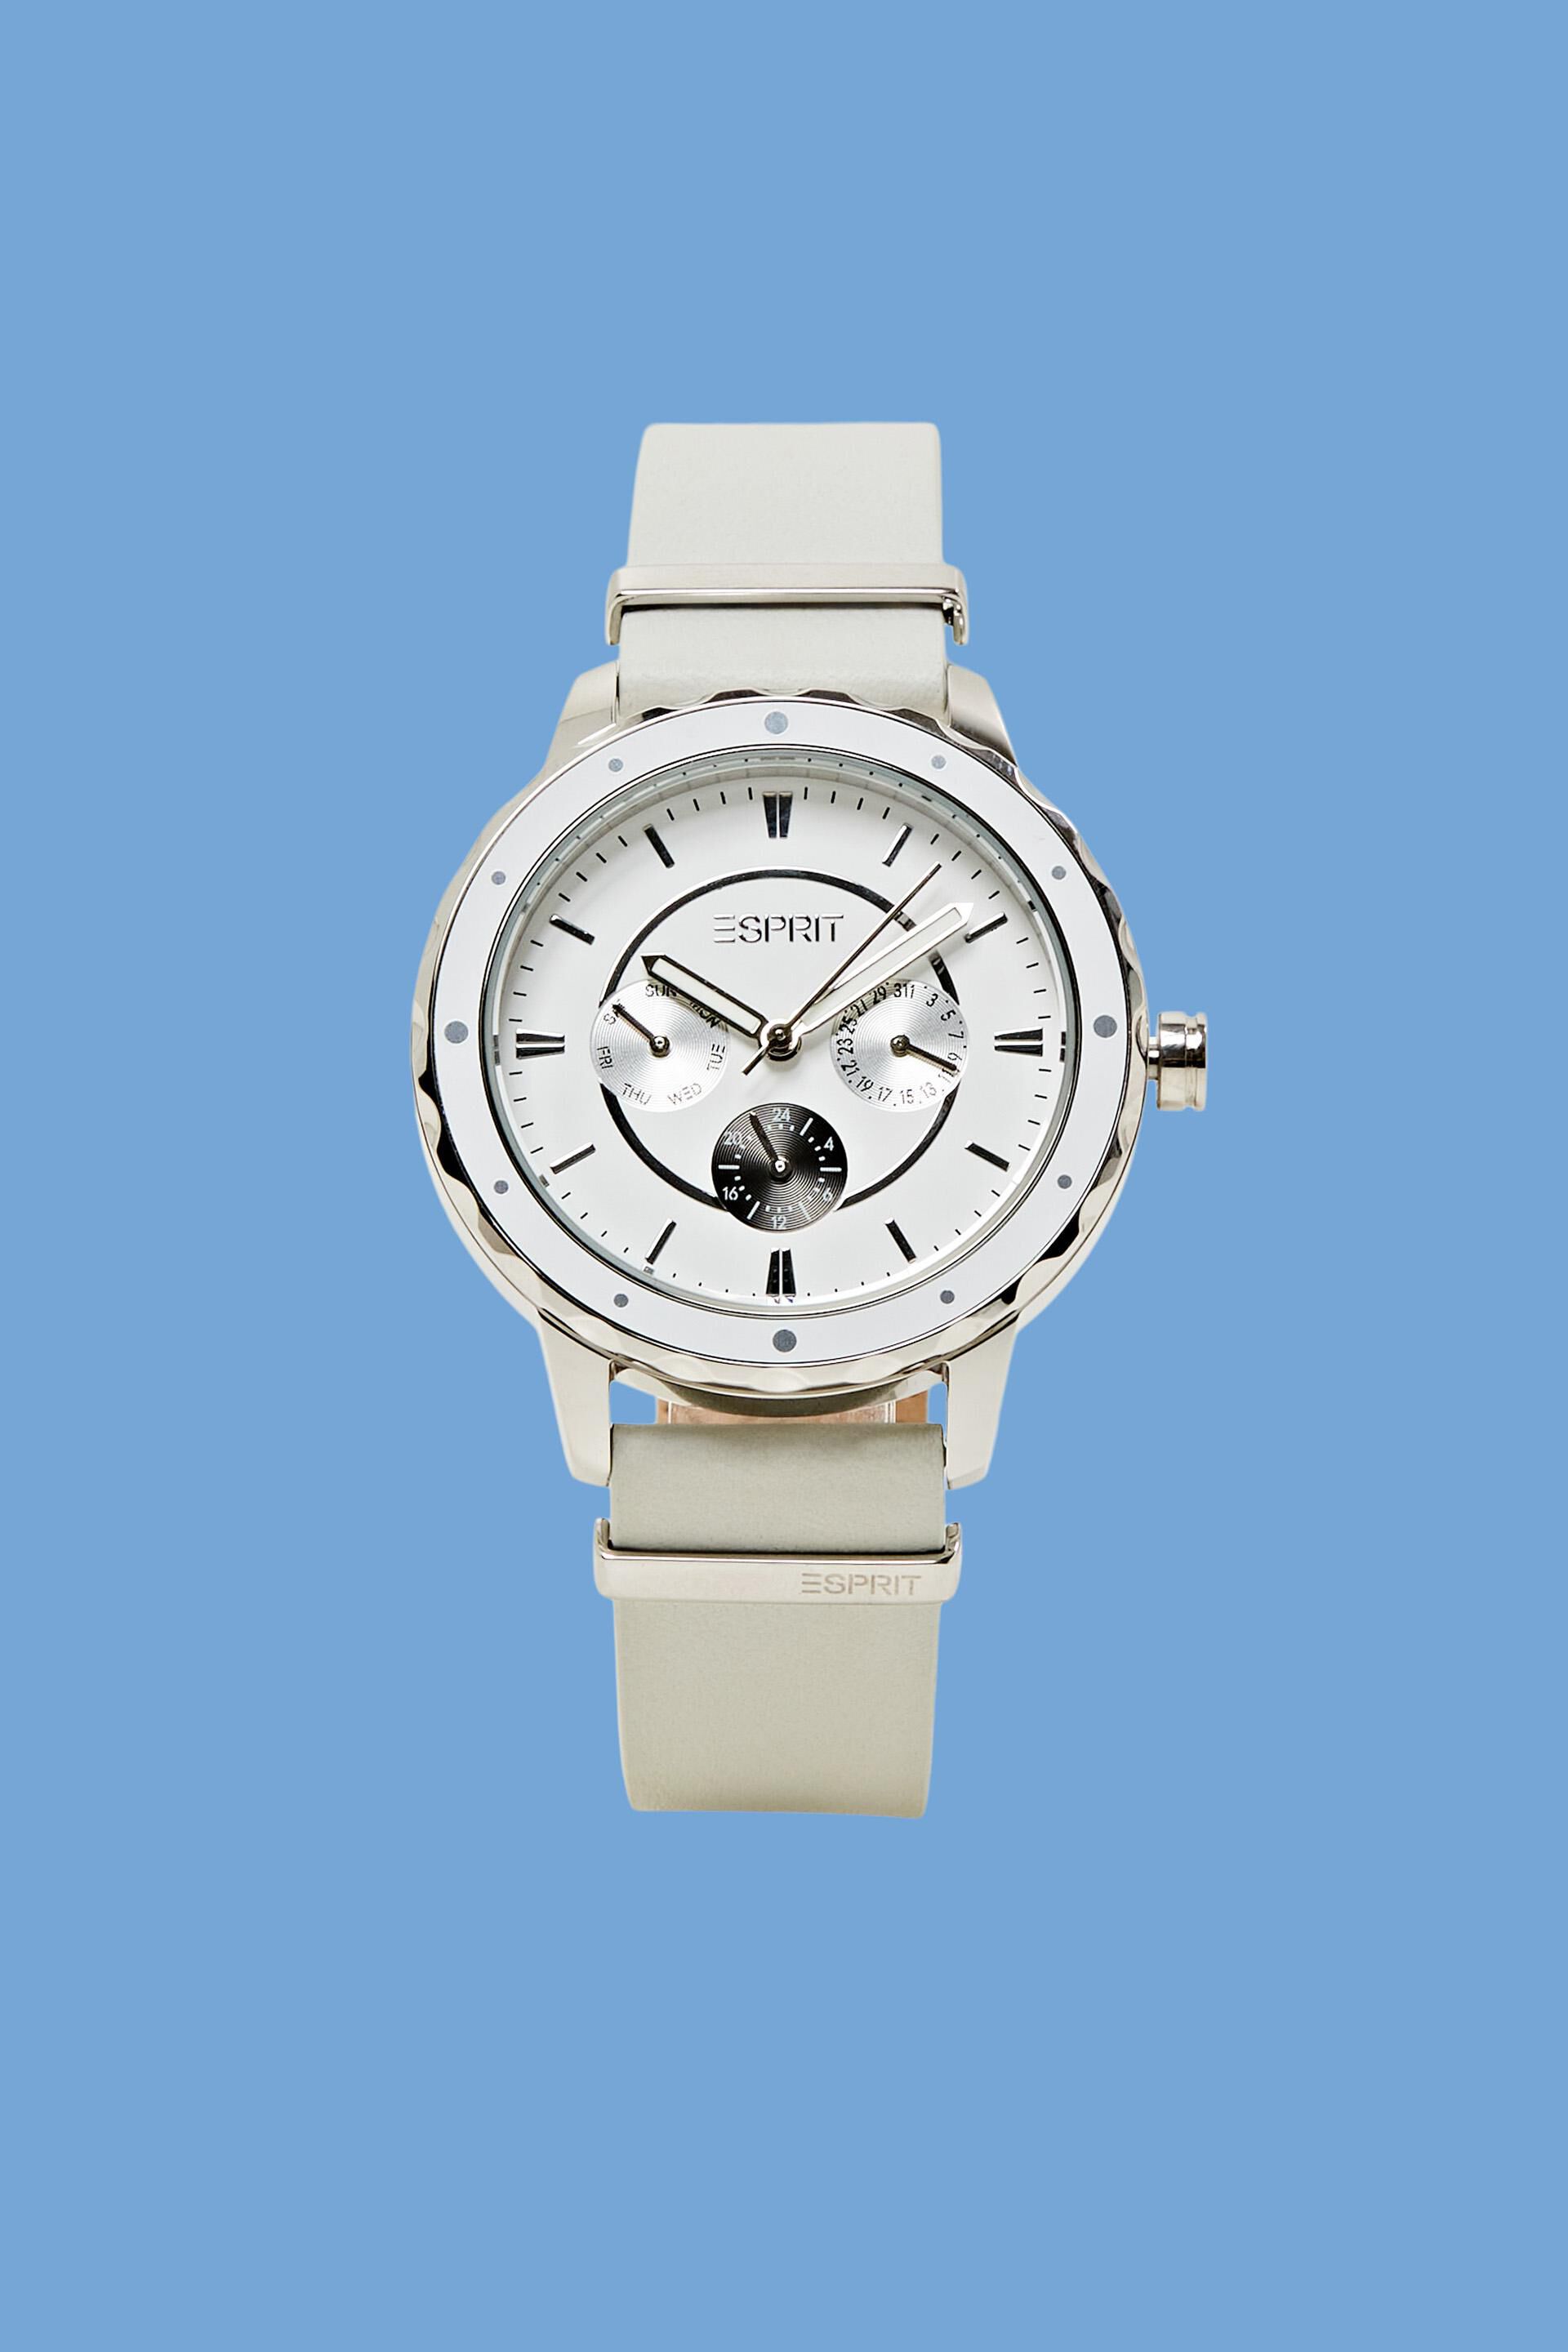 Esprit Online Store Multi-function watch with leather strap